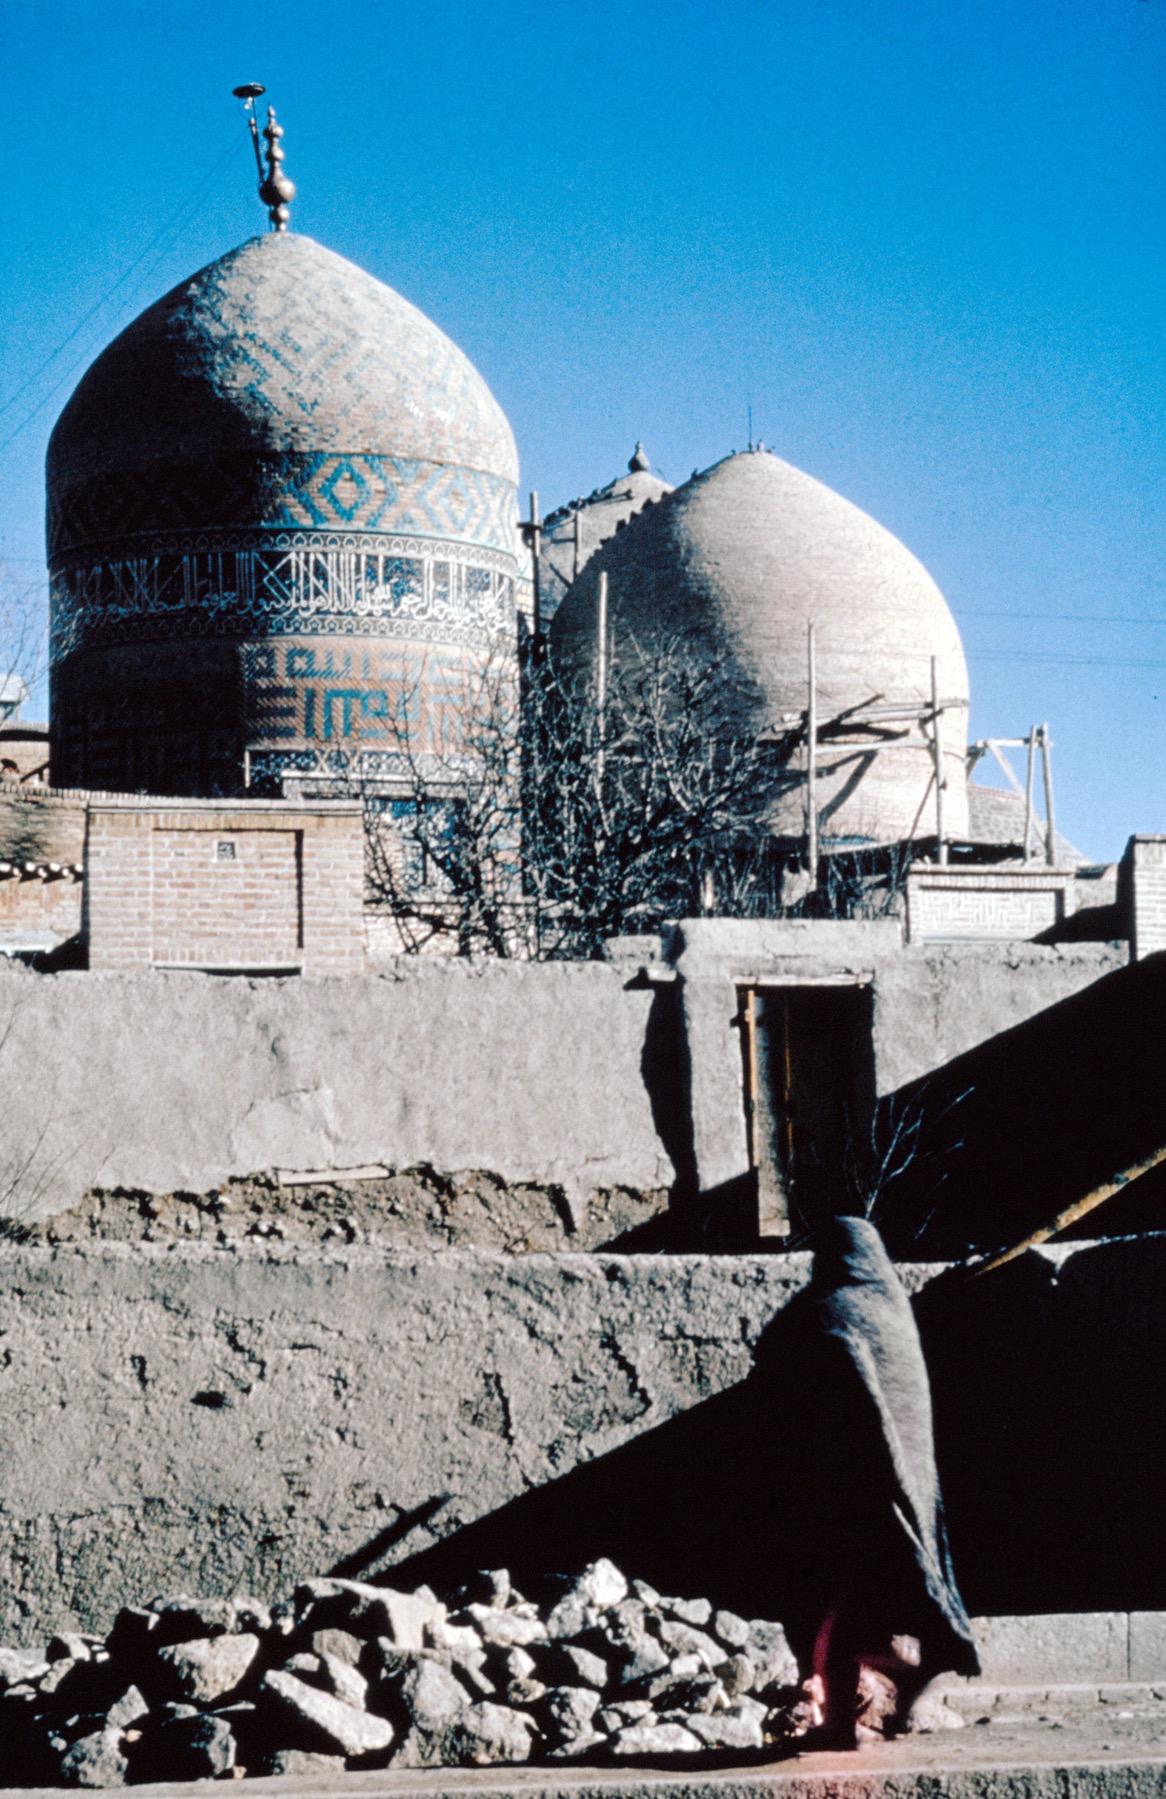 Exterior view from south, showing tomb tower of Shaykh Safi (left) and Haramkhana (right)